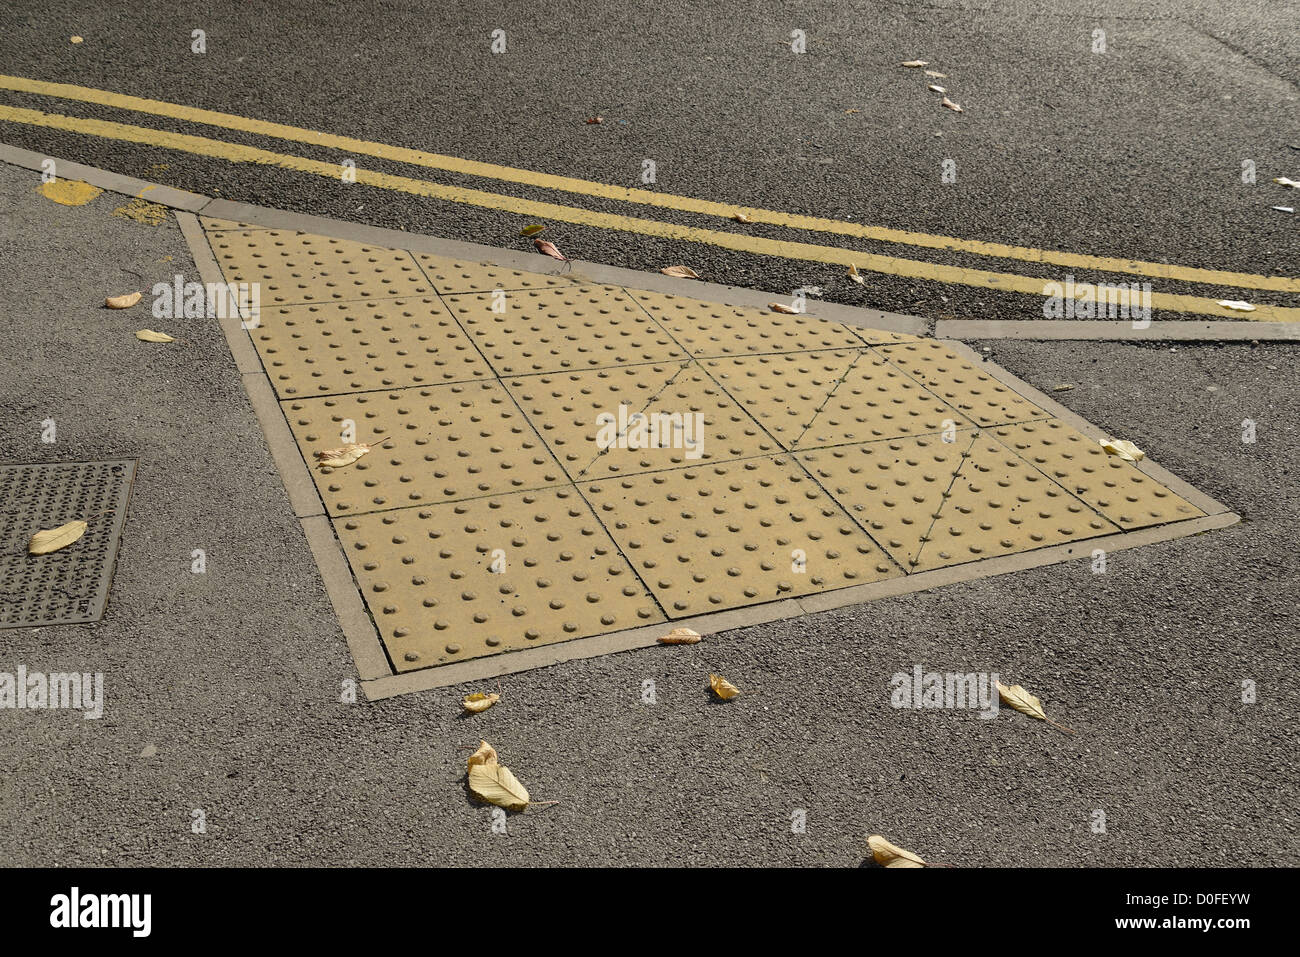 Tactile paving at the crossing point of a road to help visually impaired people avoid danger. Stock Photo